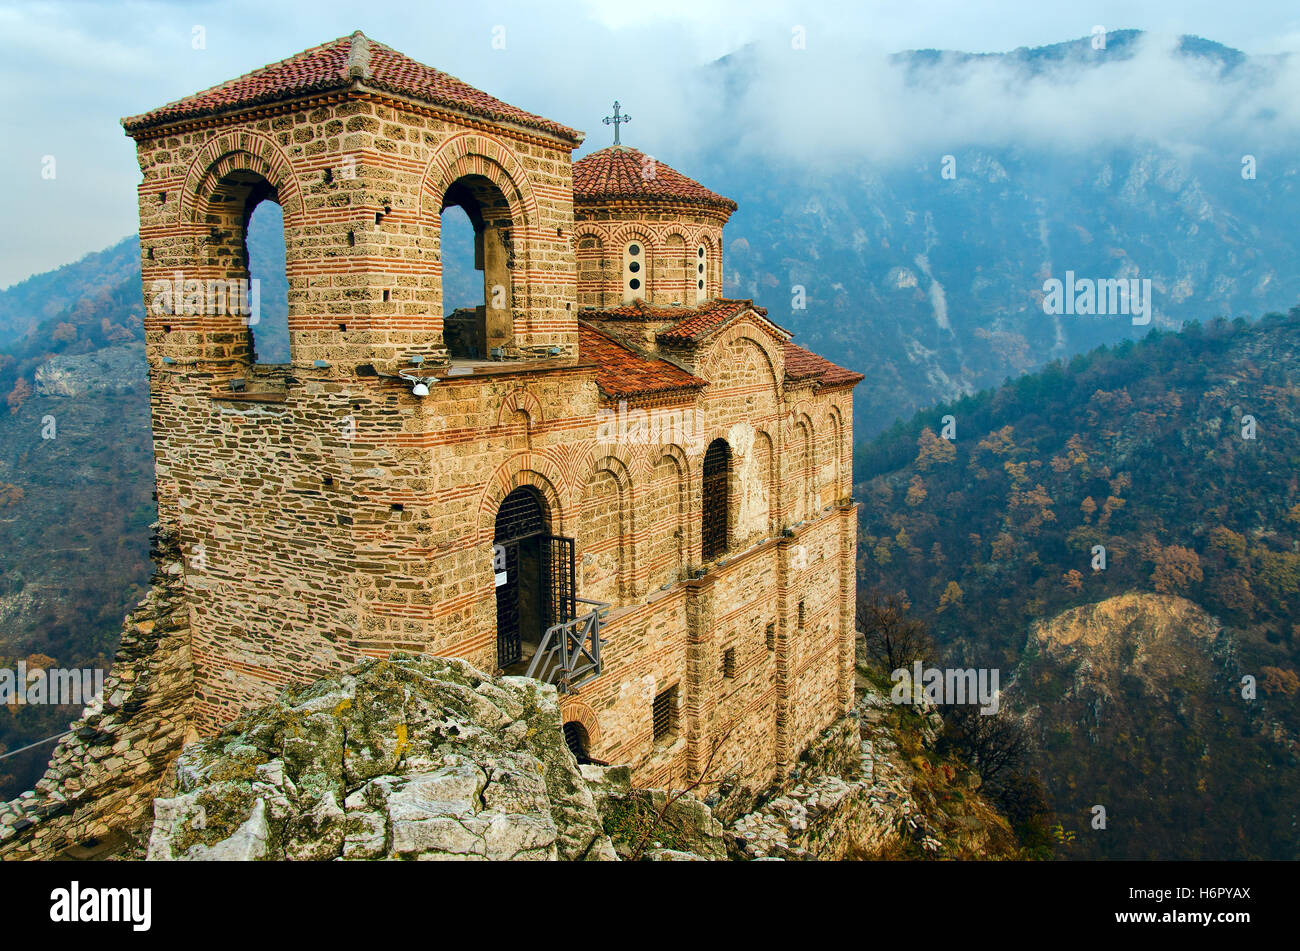 Saint Mary of Petrich church at Asen's Fortress near Asenovgrad, Bulgaria - one of the most popular landmarks in the country Stock Photo